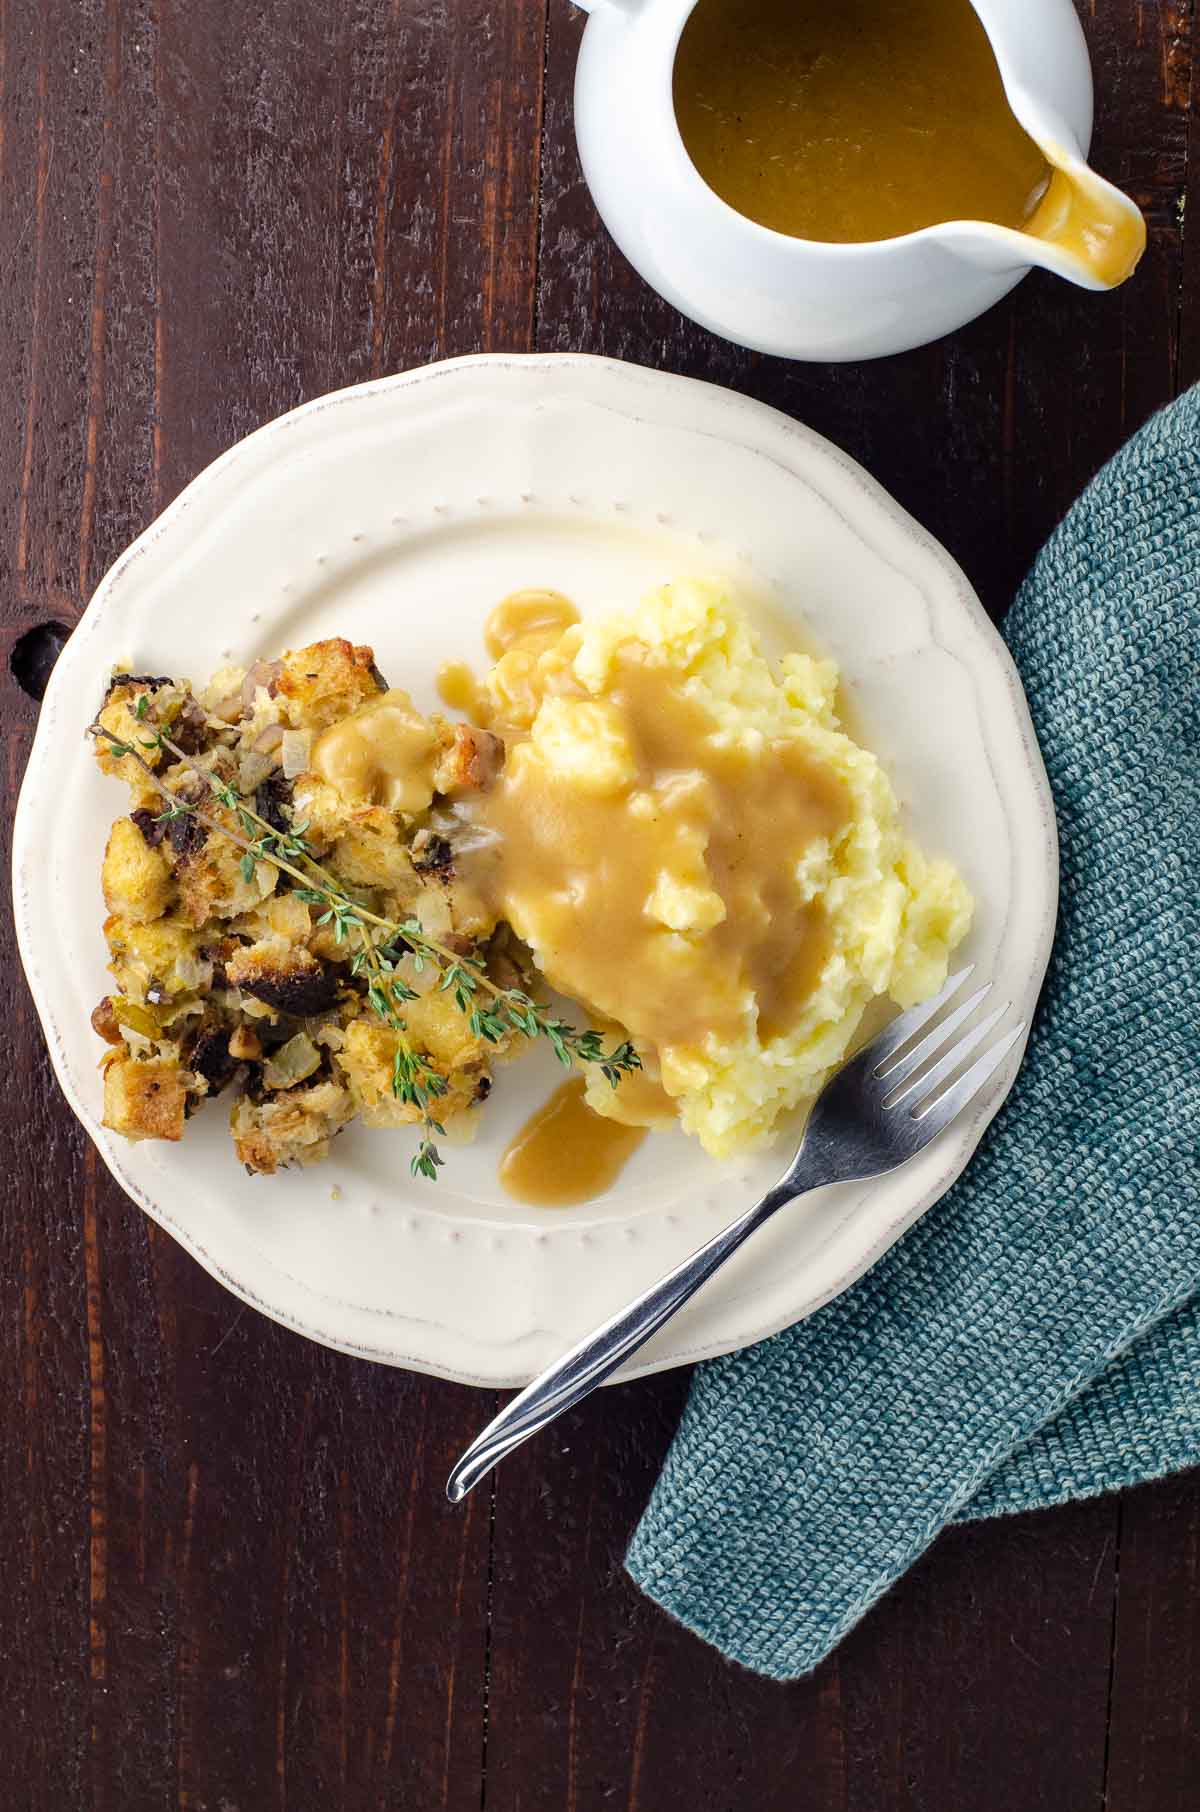 yukon gold mashed potatoes from a small batch on a plate with stuffing and gravy